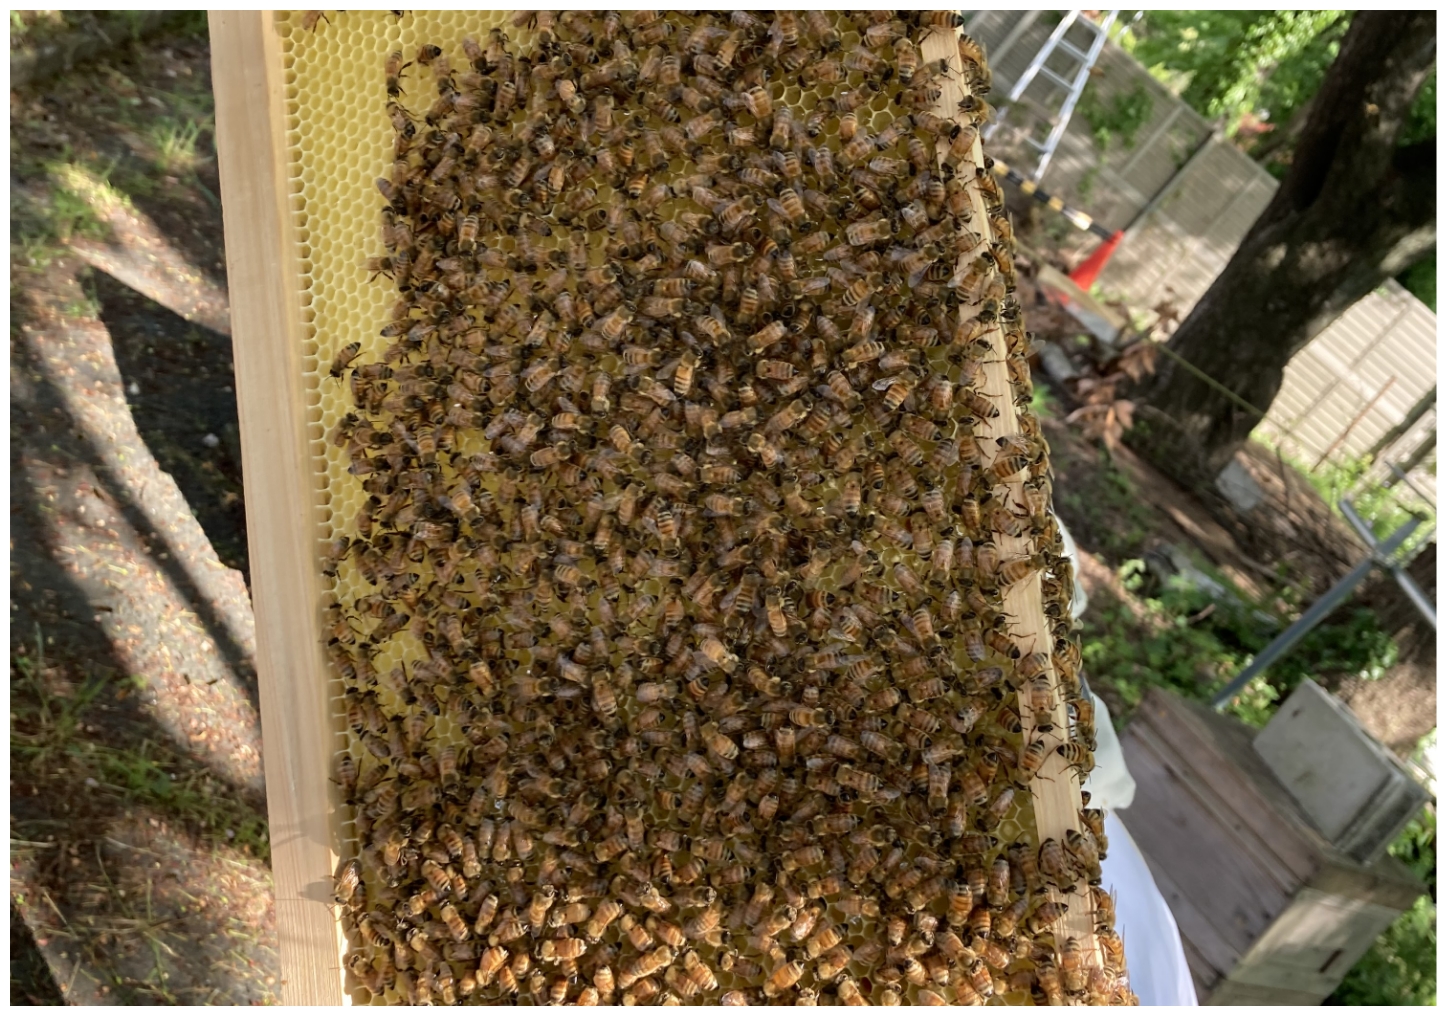 (3) Beekeeping at the Research Institute for Animal Science in Biochemistry and Toxicology (ii)